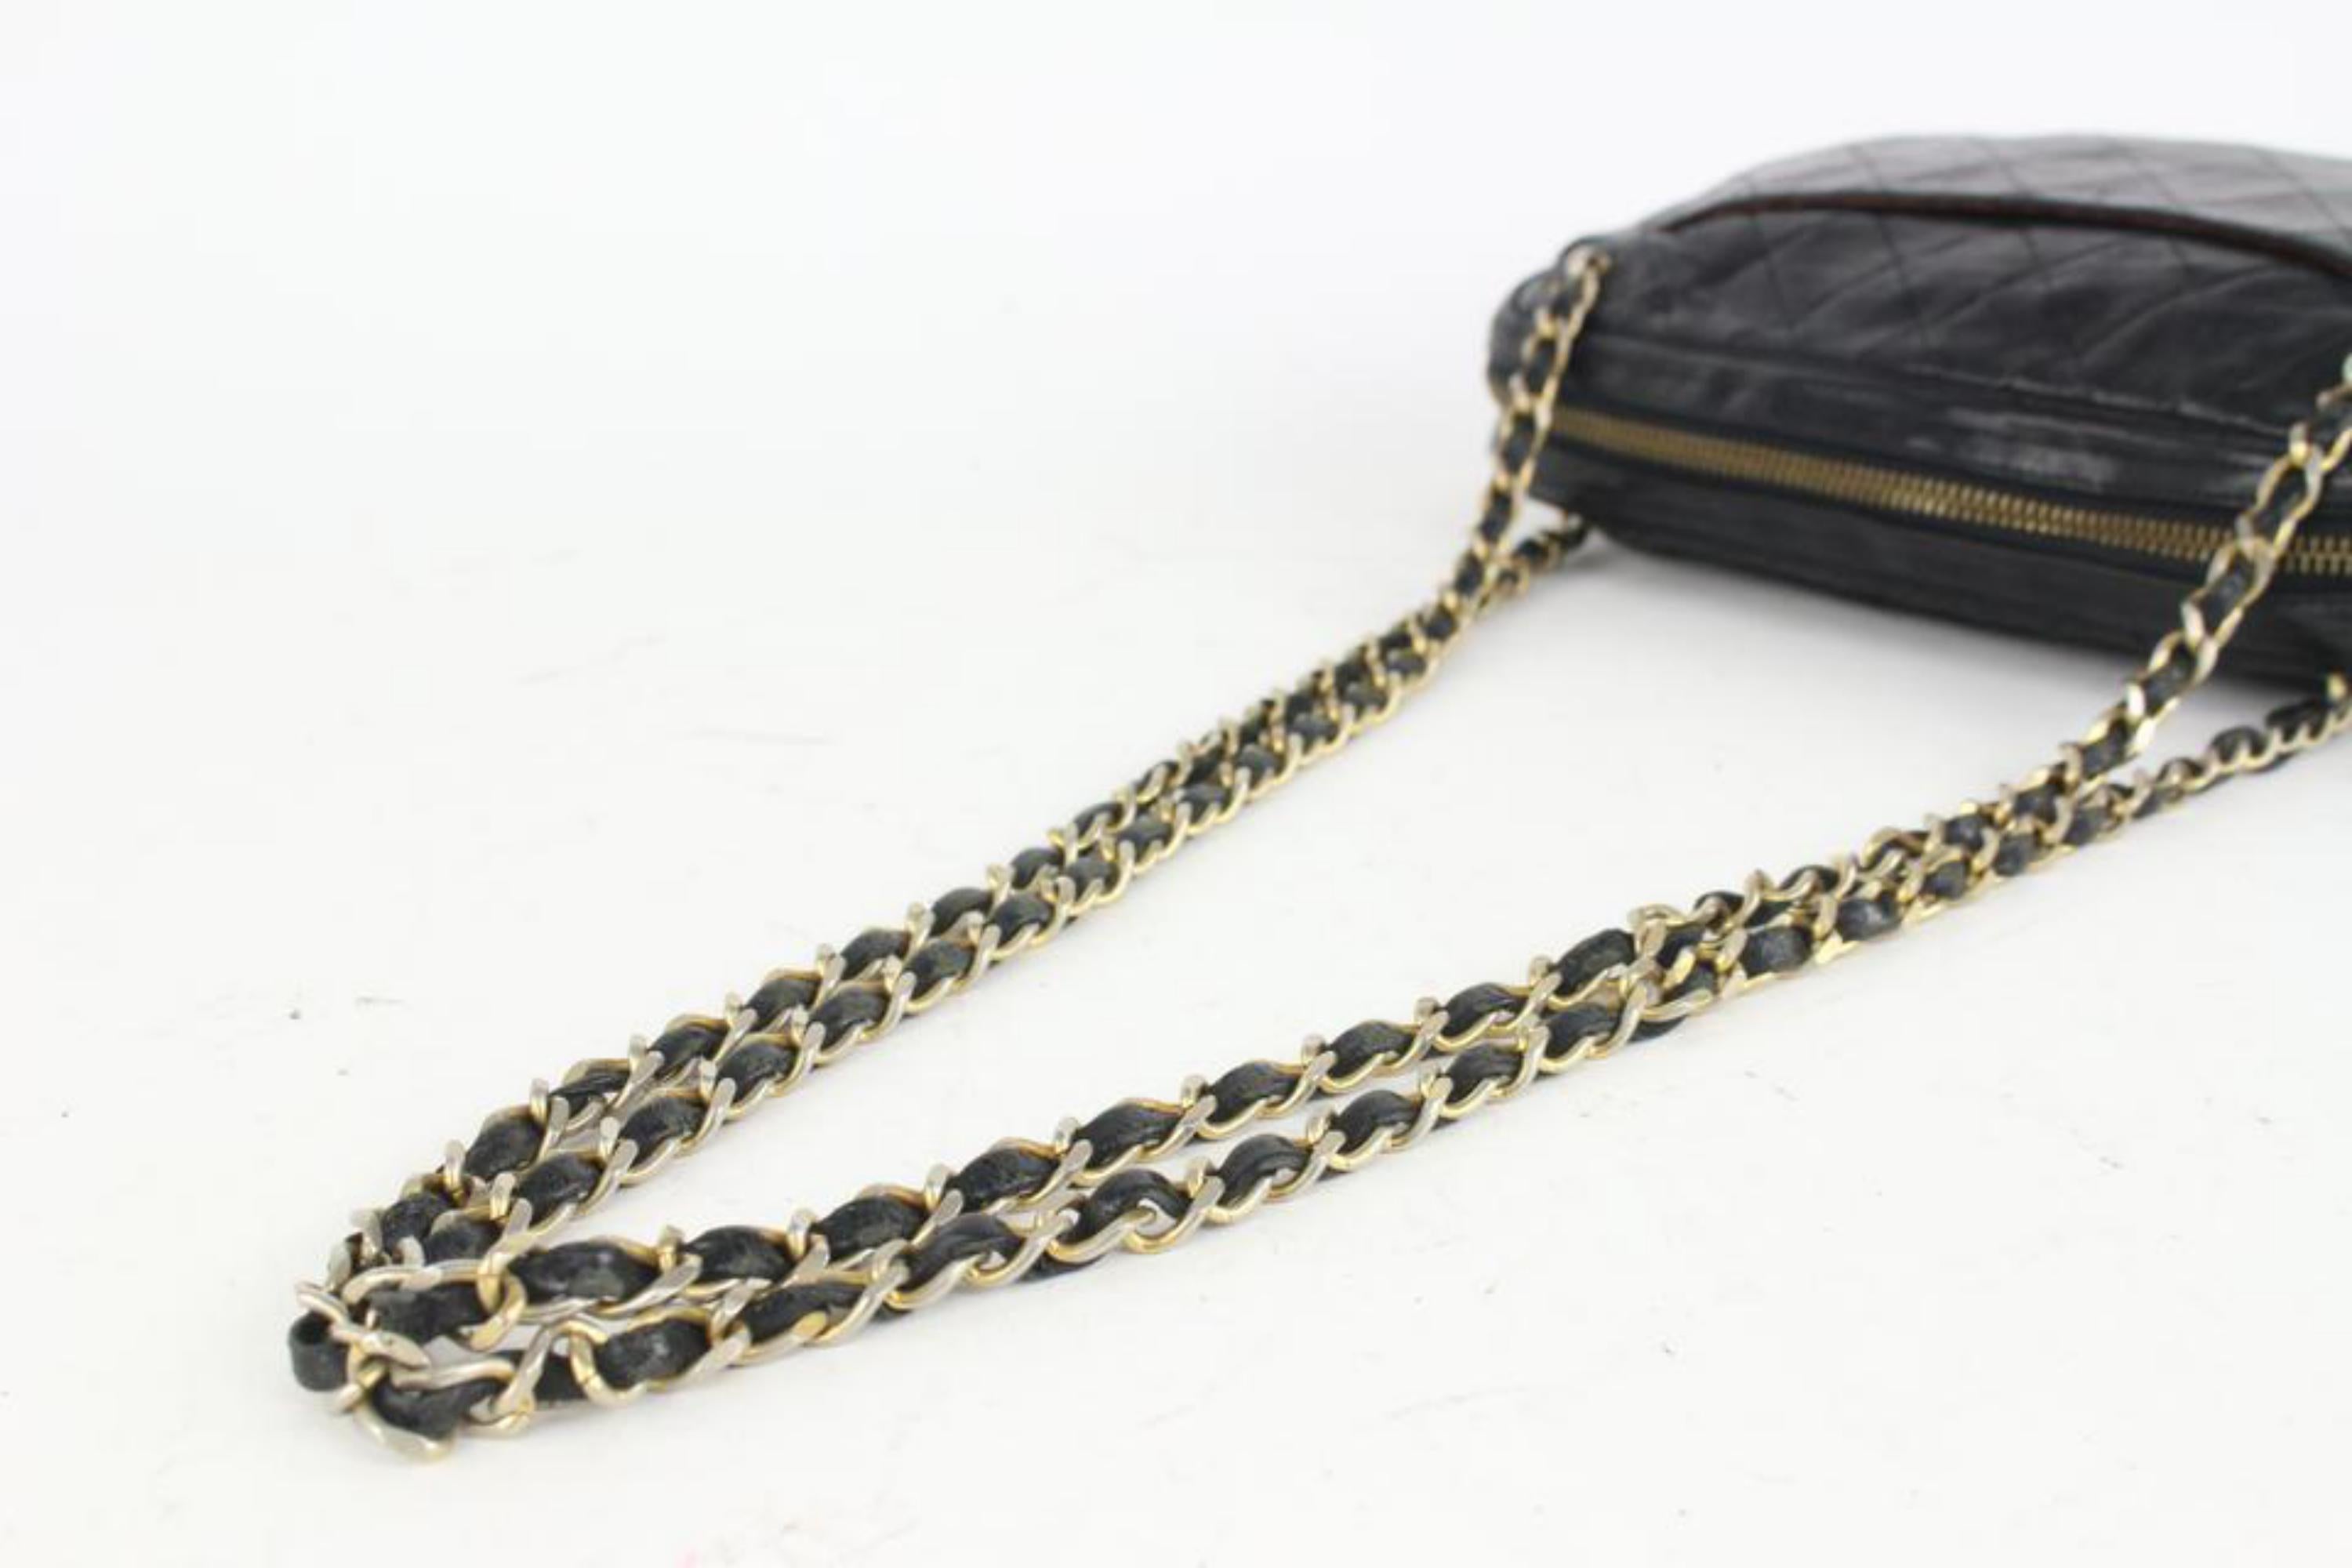 Chanel Black Quilted Lambskin Camera Bag Gold Chain 1014c7 For Sale 4